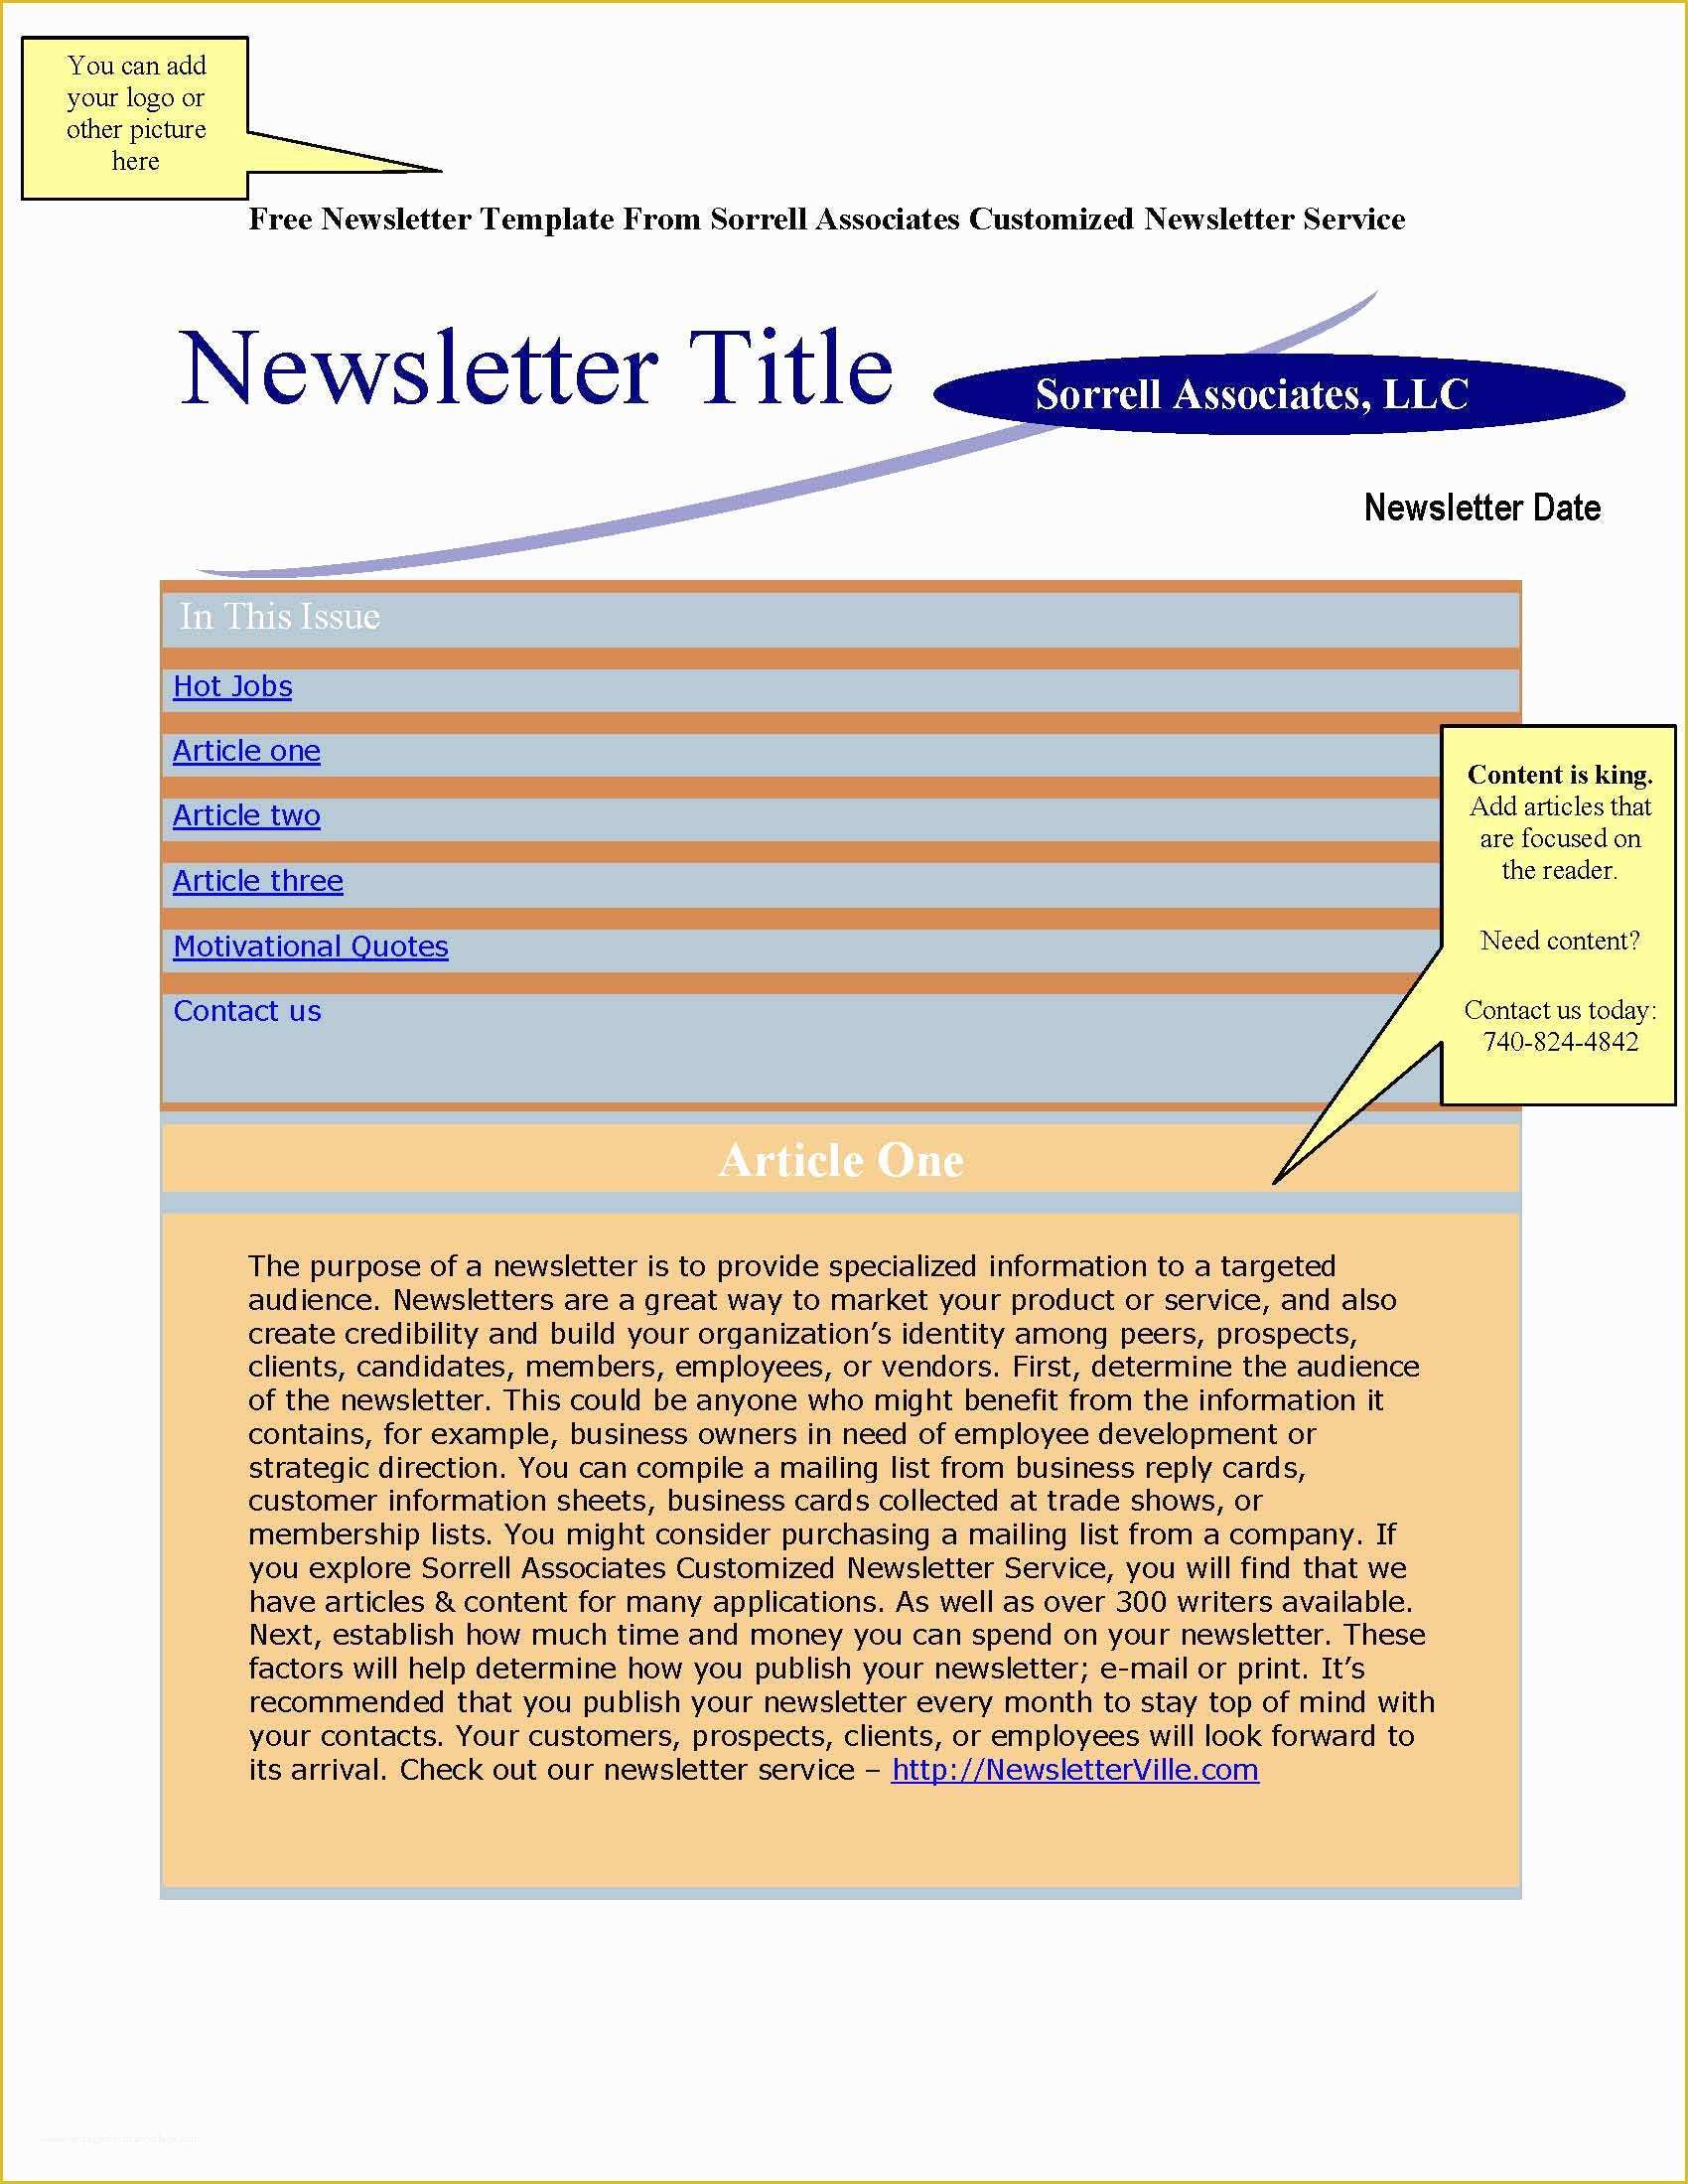 Staff Newsletter Templates Free Of Newsletter & Blog Articles Provided Plus Free Newsletter